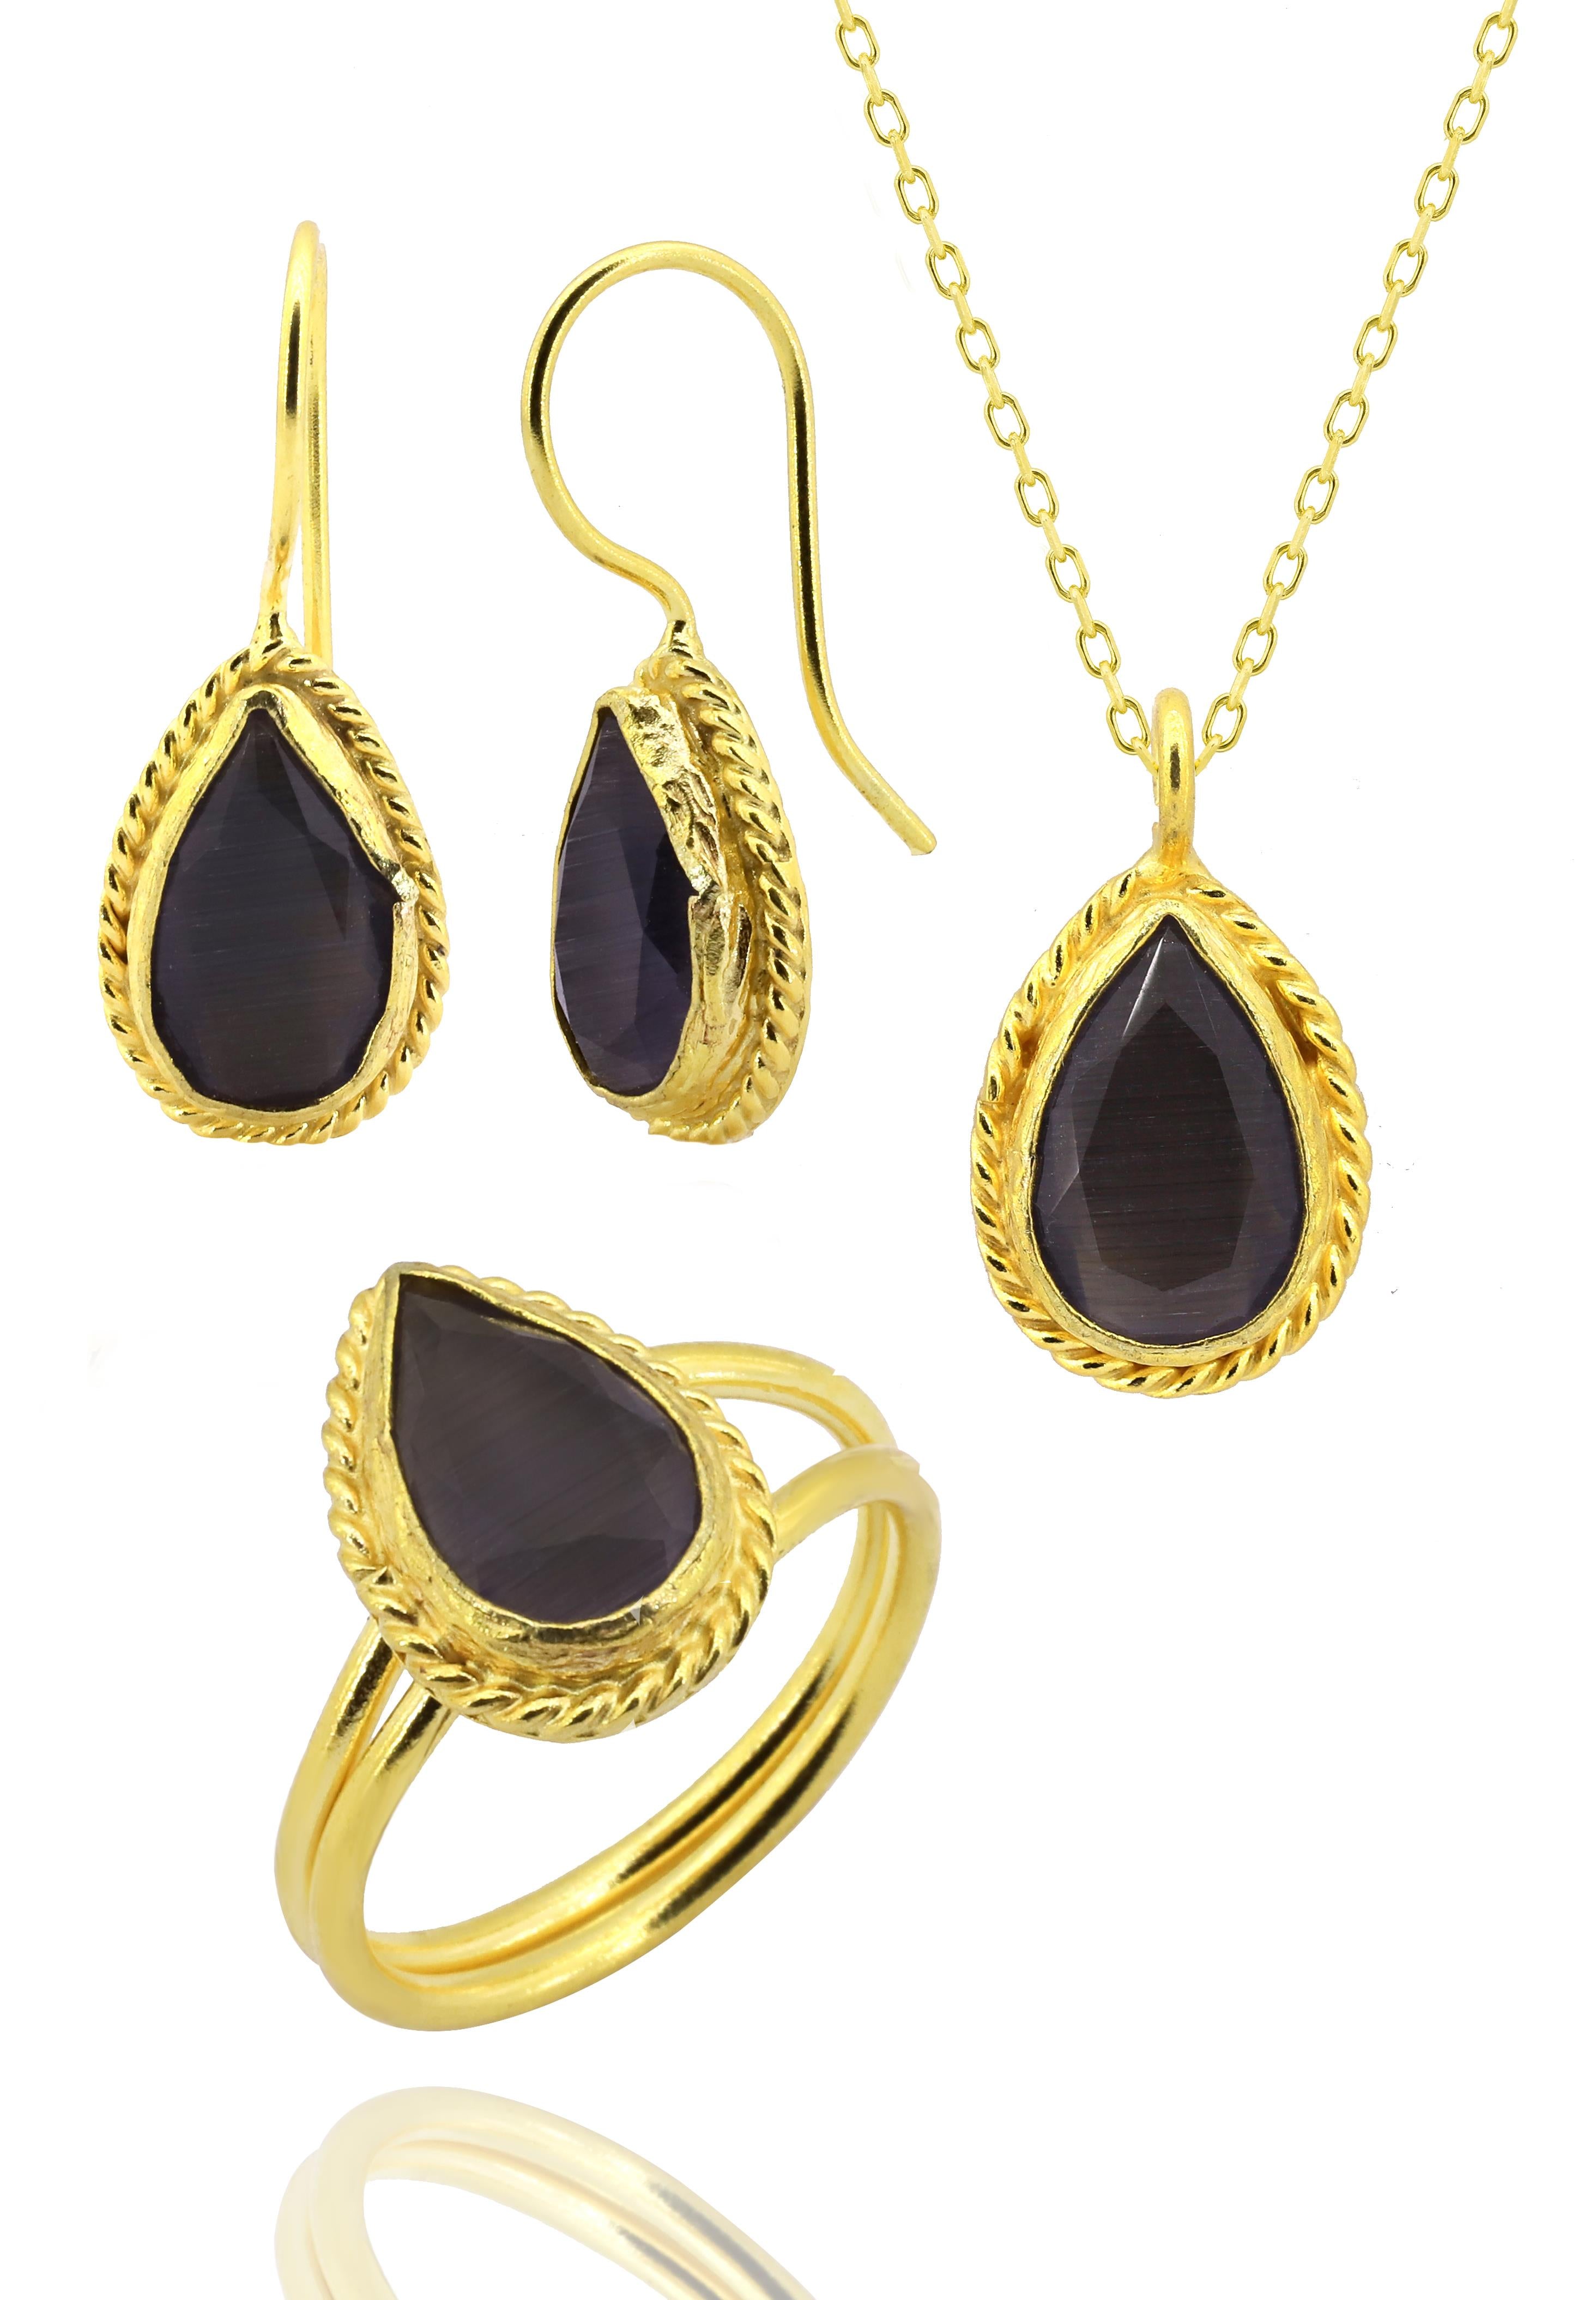 Sun Stone Series Winding Drop Cut Black Color Onyx 22K Gold Plated Women's  Triple Set 925 Sterling Silver Chain Handcrafted